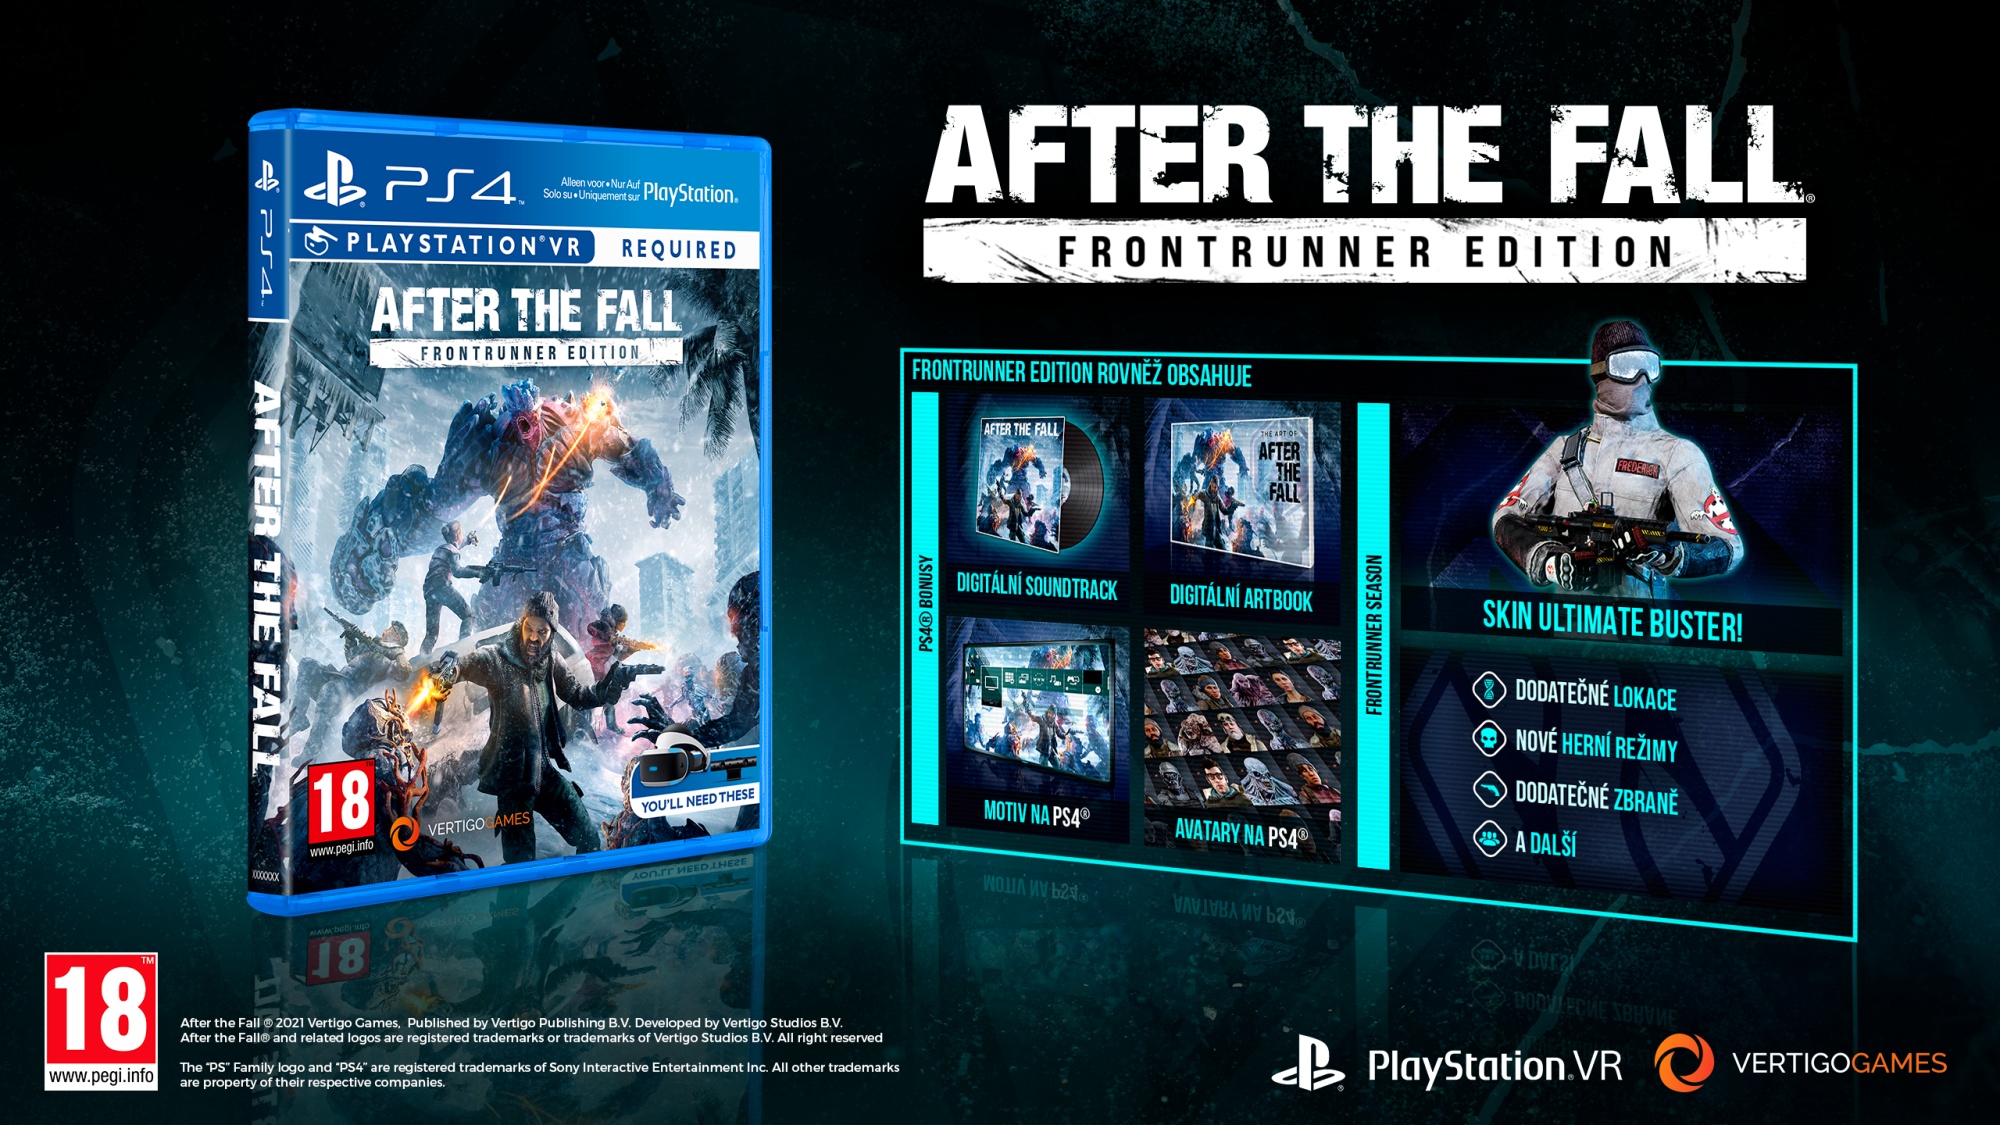 After the Fall Frontrunner Edition PS4 VR